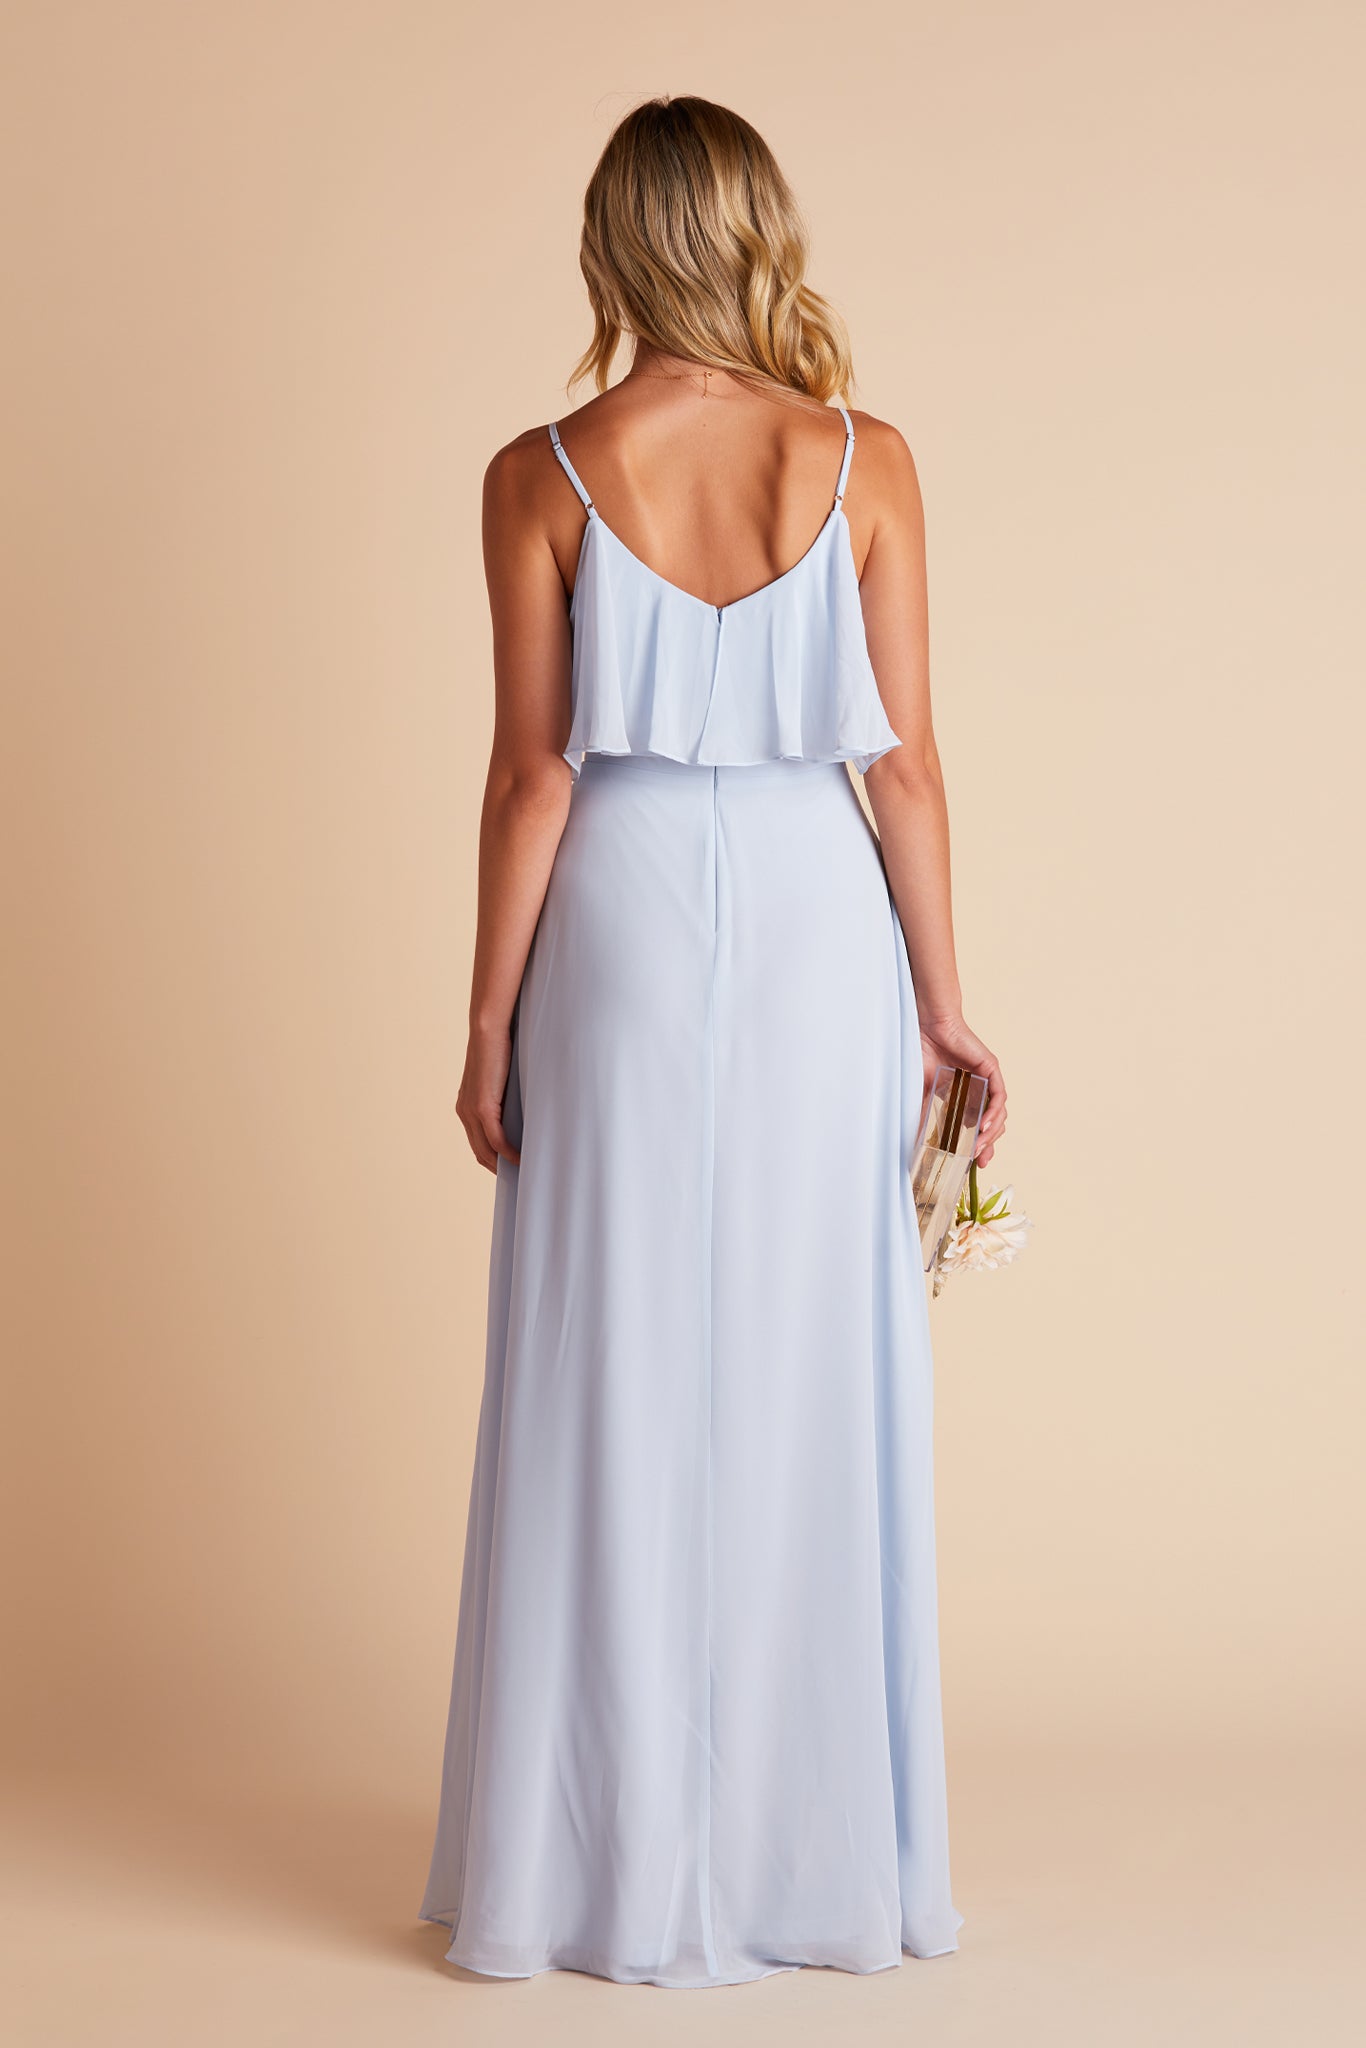 Jane convertible bridesmaid dress with slit in ice blue chiffon by Birdy Grey, back view